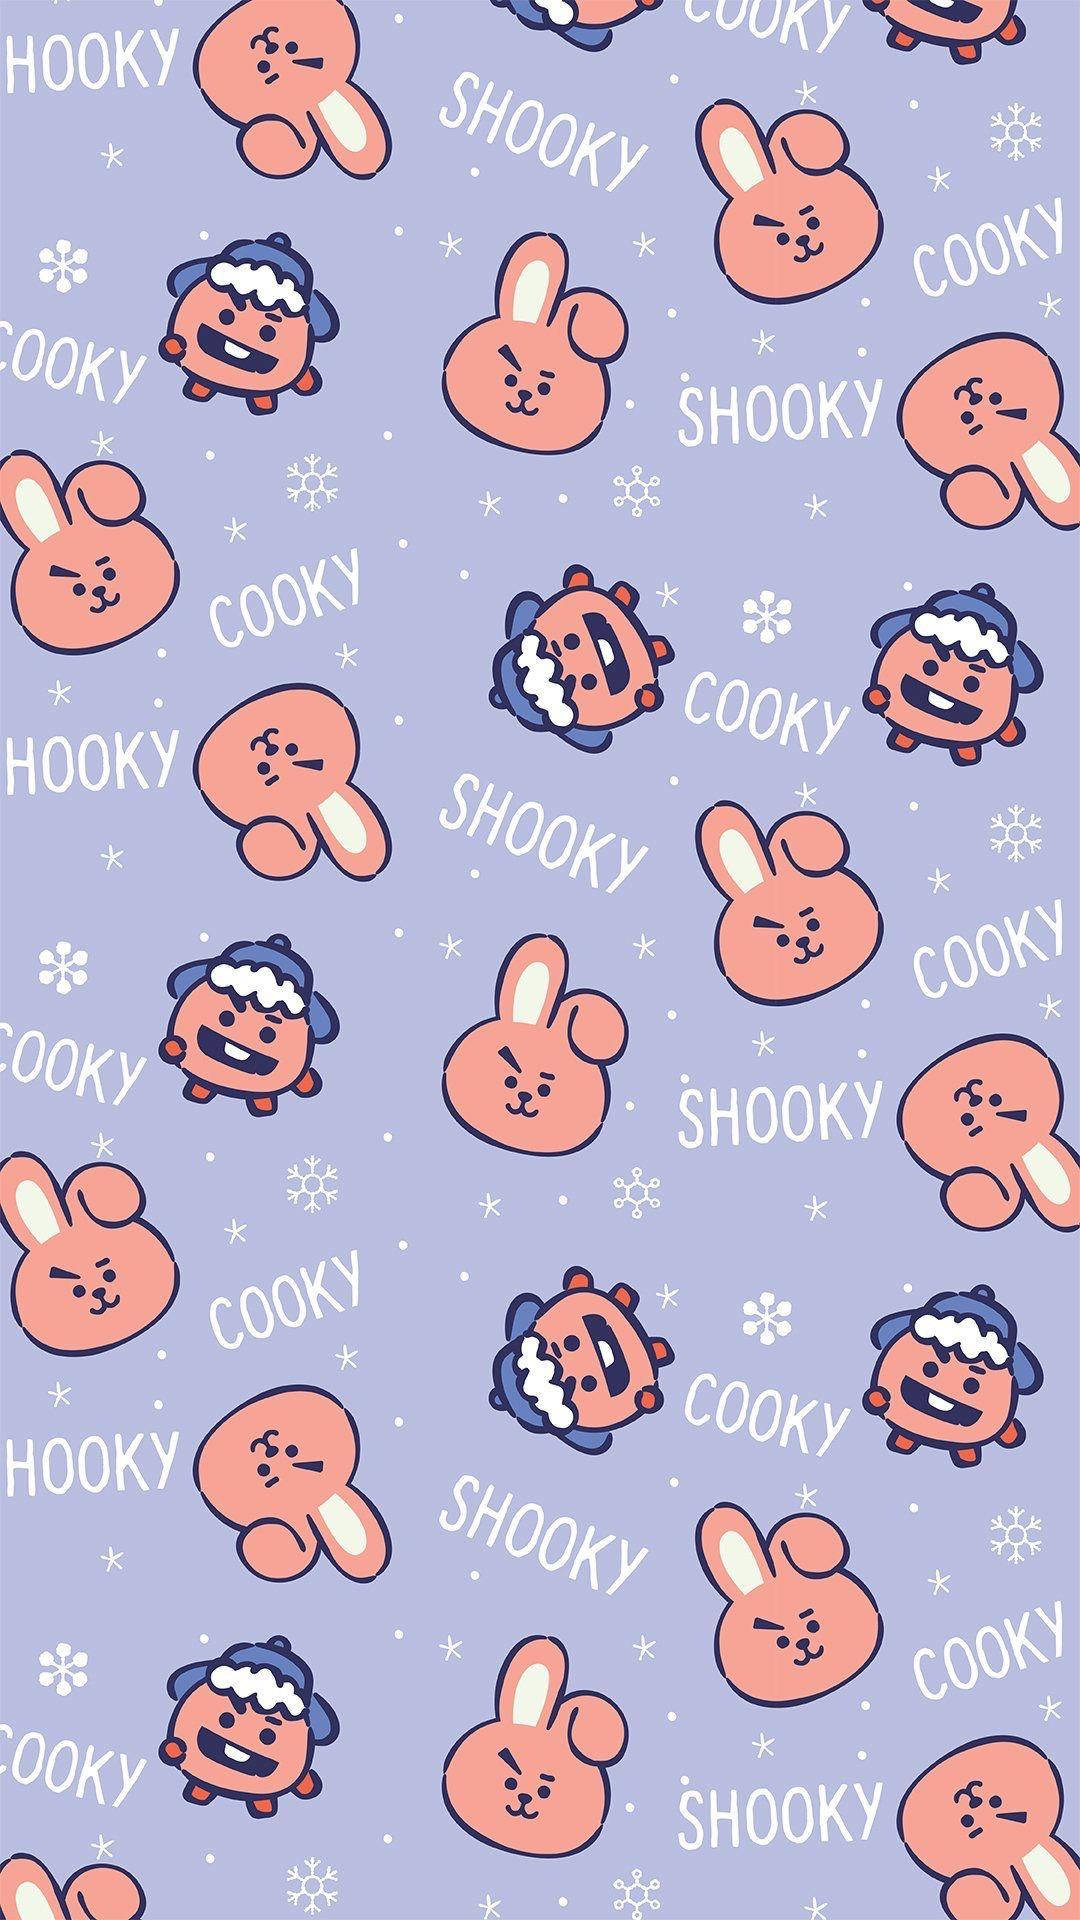 Cooky BT21 on Dog, bts plushies HD phone wallpaper | Pxfuel